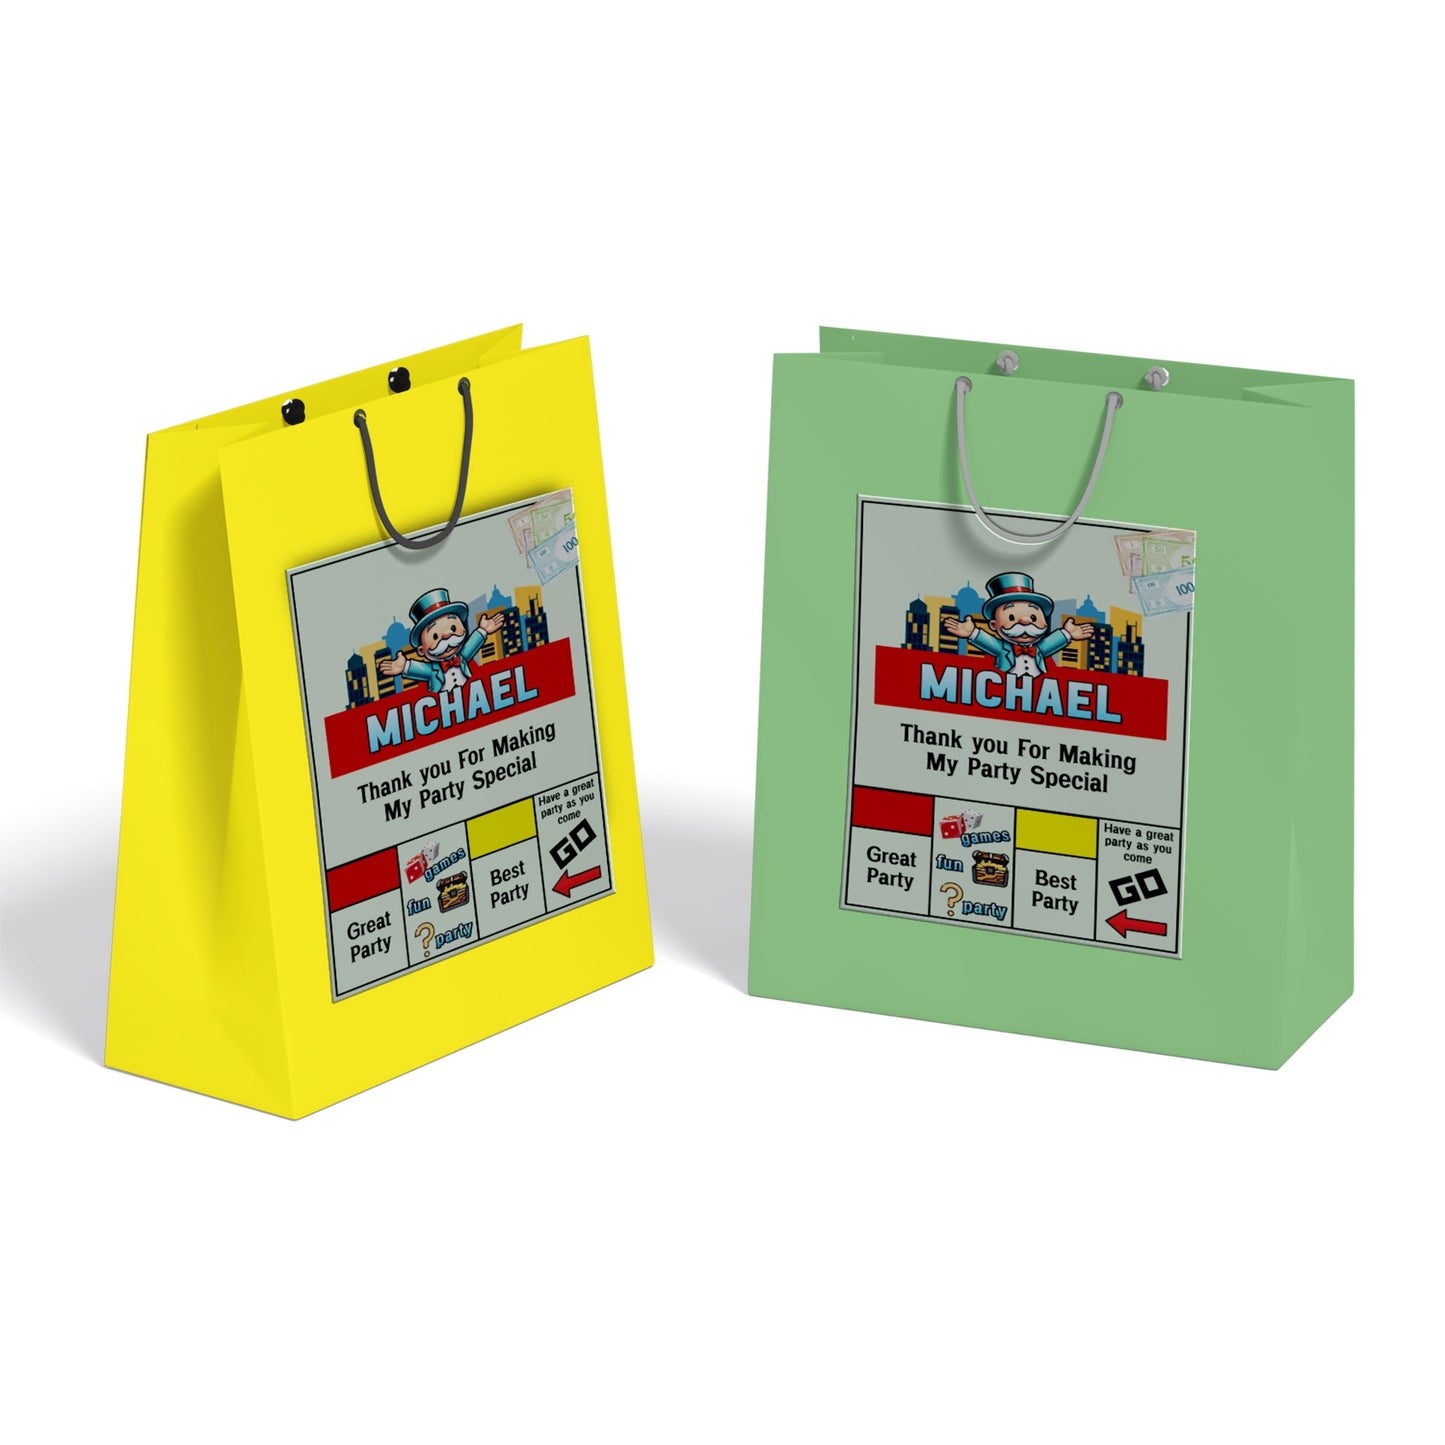 Goody bag label featuring Monopoly Go theme